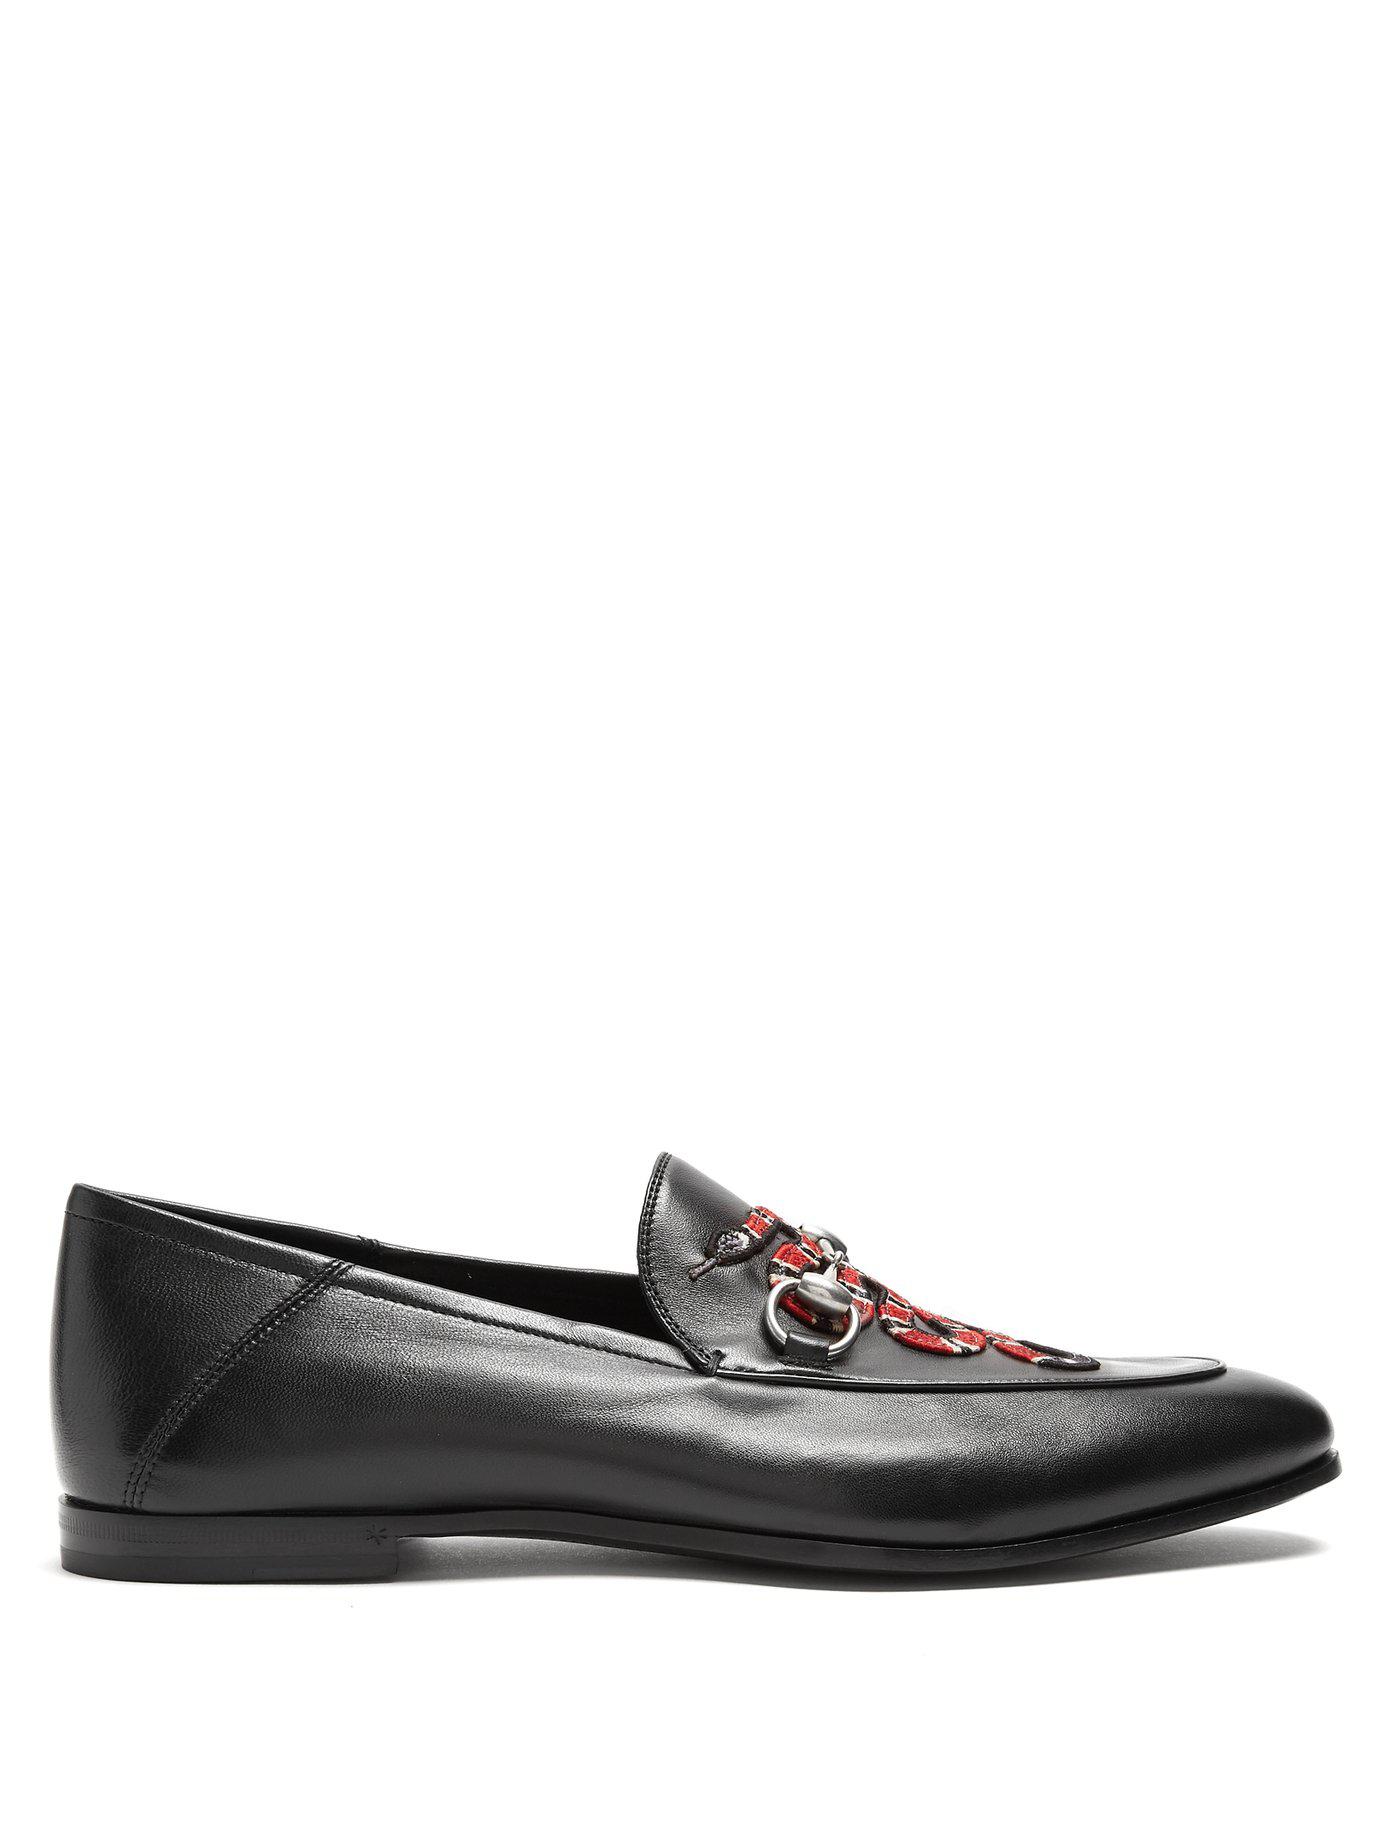 Gucci Snake-appliqué Leather Loafers in Black for Men Lyst